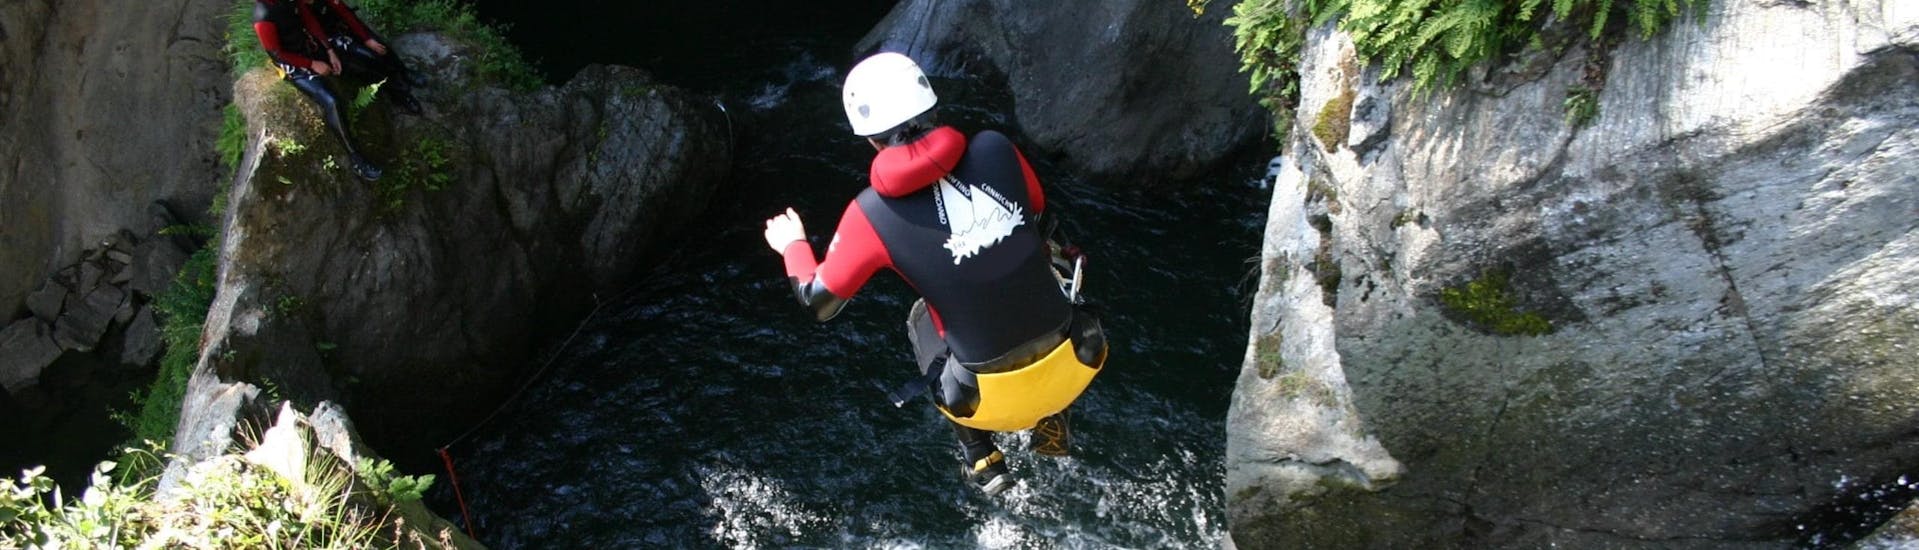 A canyoneer is jumping from a waterfall into a natural pool of water during the tour Canyoning in the Alpenrosenklamm in Ötztal - Stag Party with CanKick Ötztal.